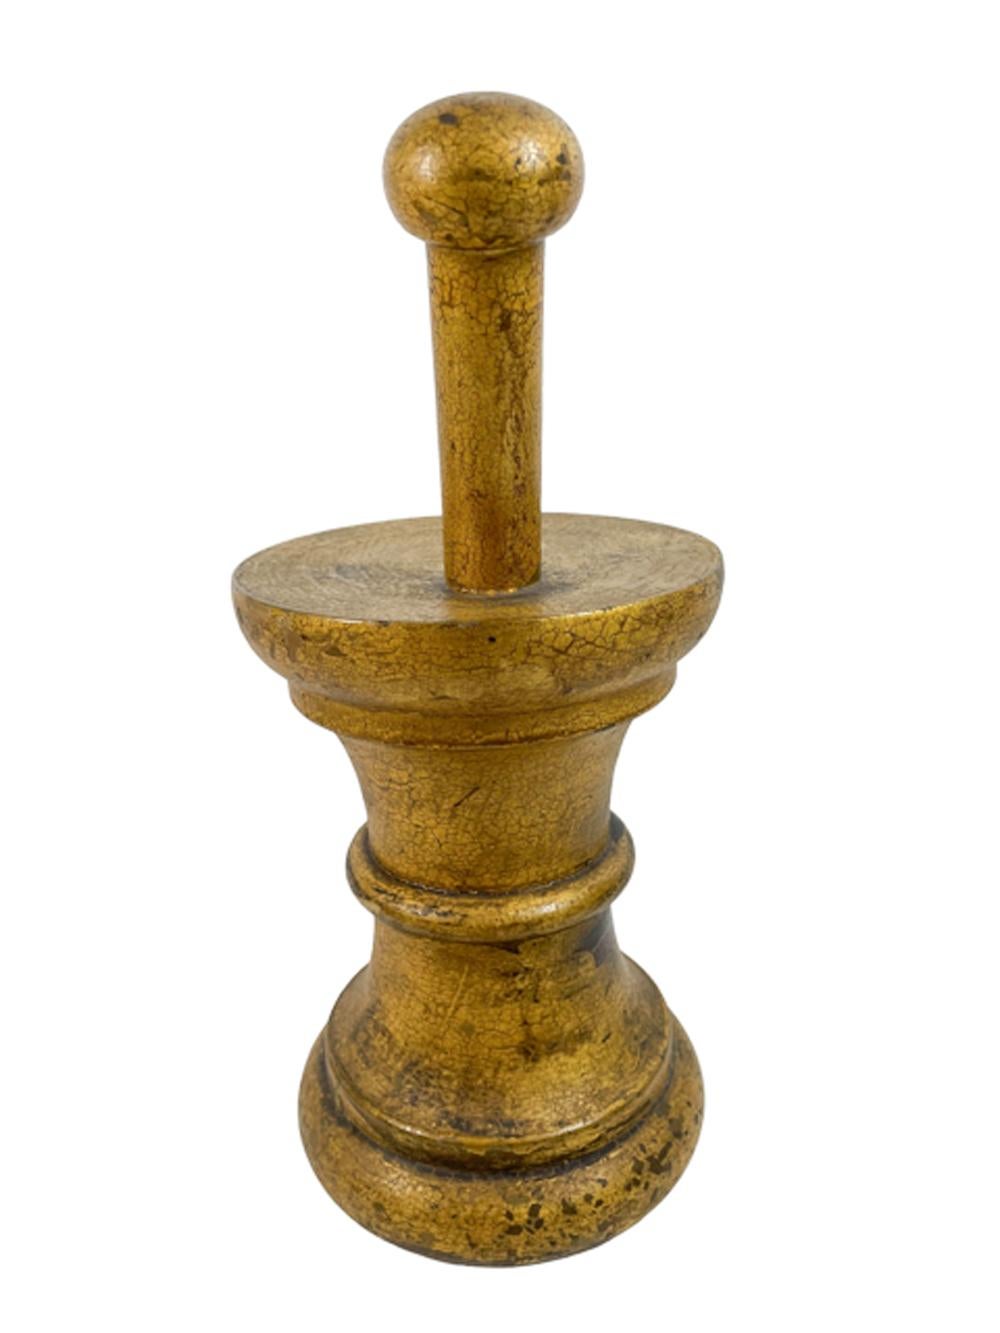 Apothecary trade sign or sale stimulator in the form of a mortar and pestle in gilt wood. The mortar of cylindrical waisted form with a central half round band and stepped rings at top and bottom, the solid top with the handle of a pestle rising at